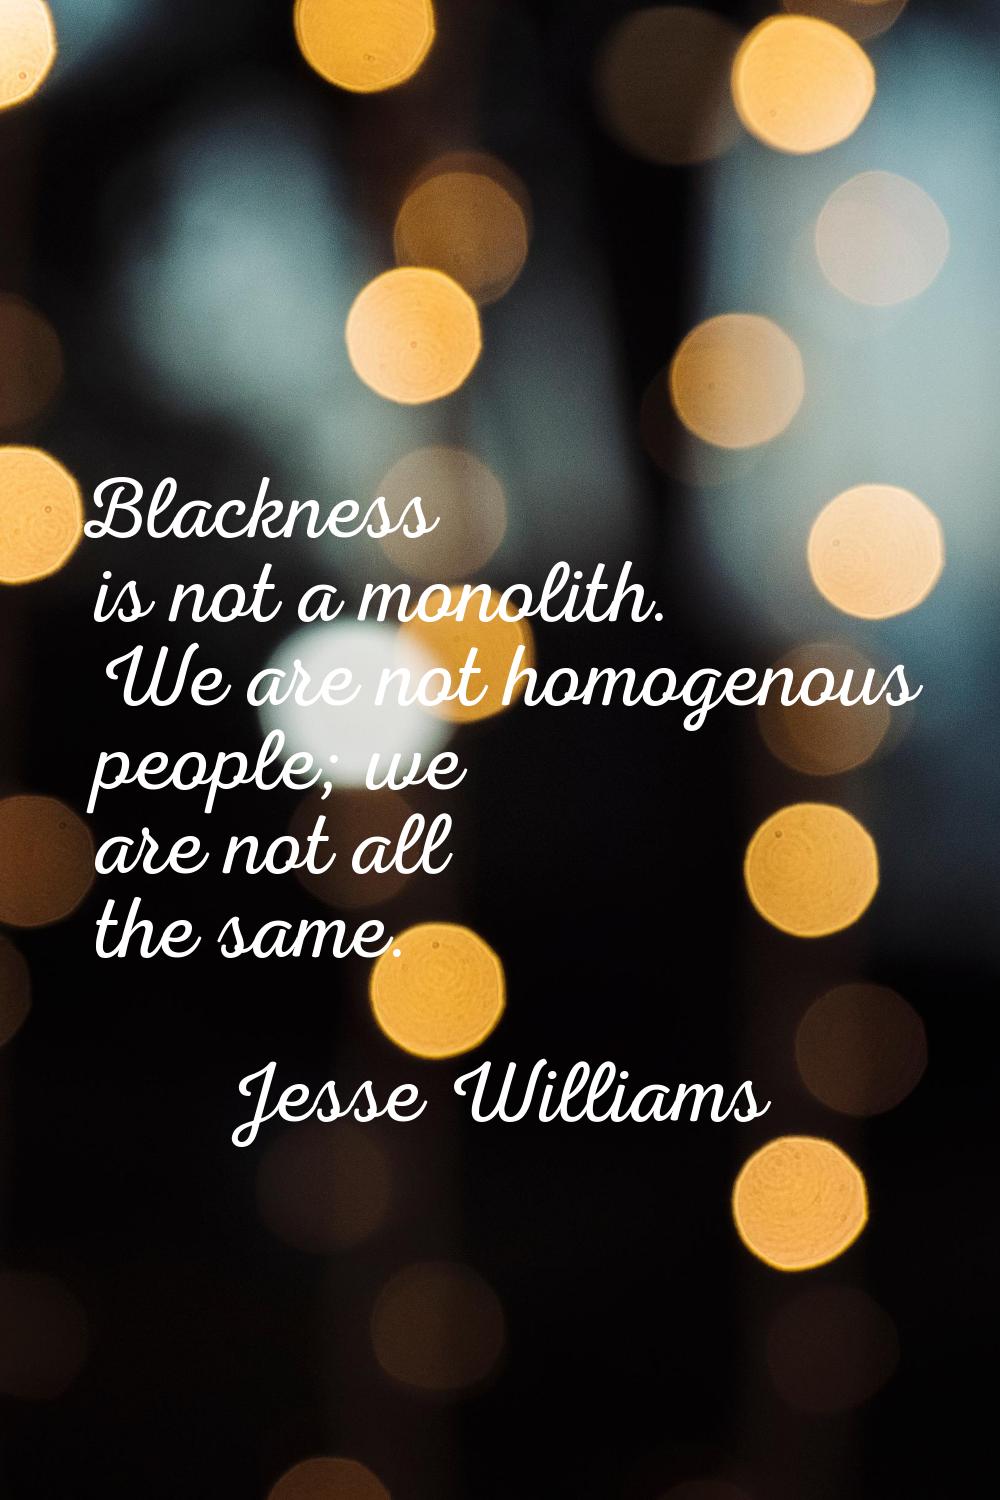 Blackness is not a monolith. We are not homogenous people; we are not all the same.